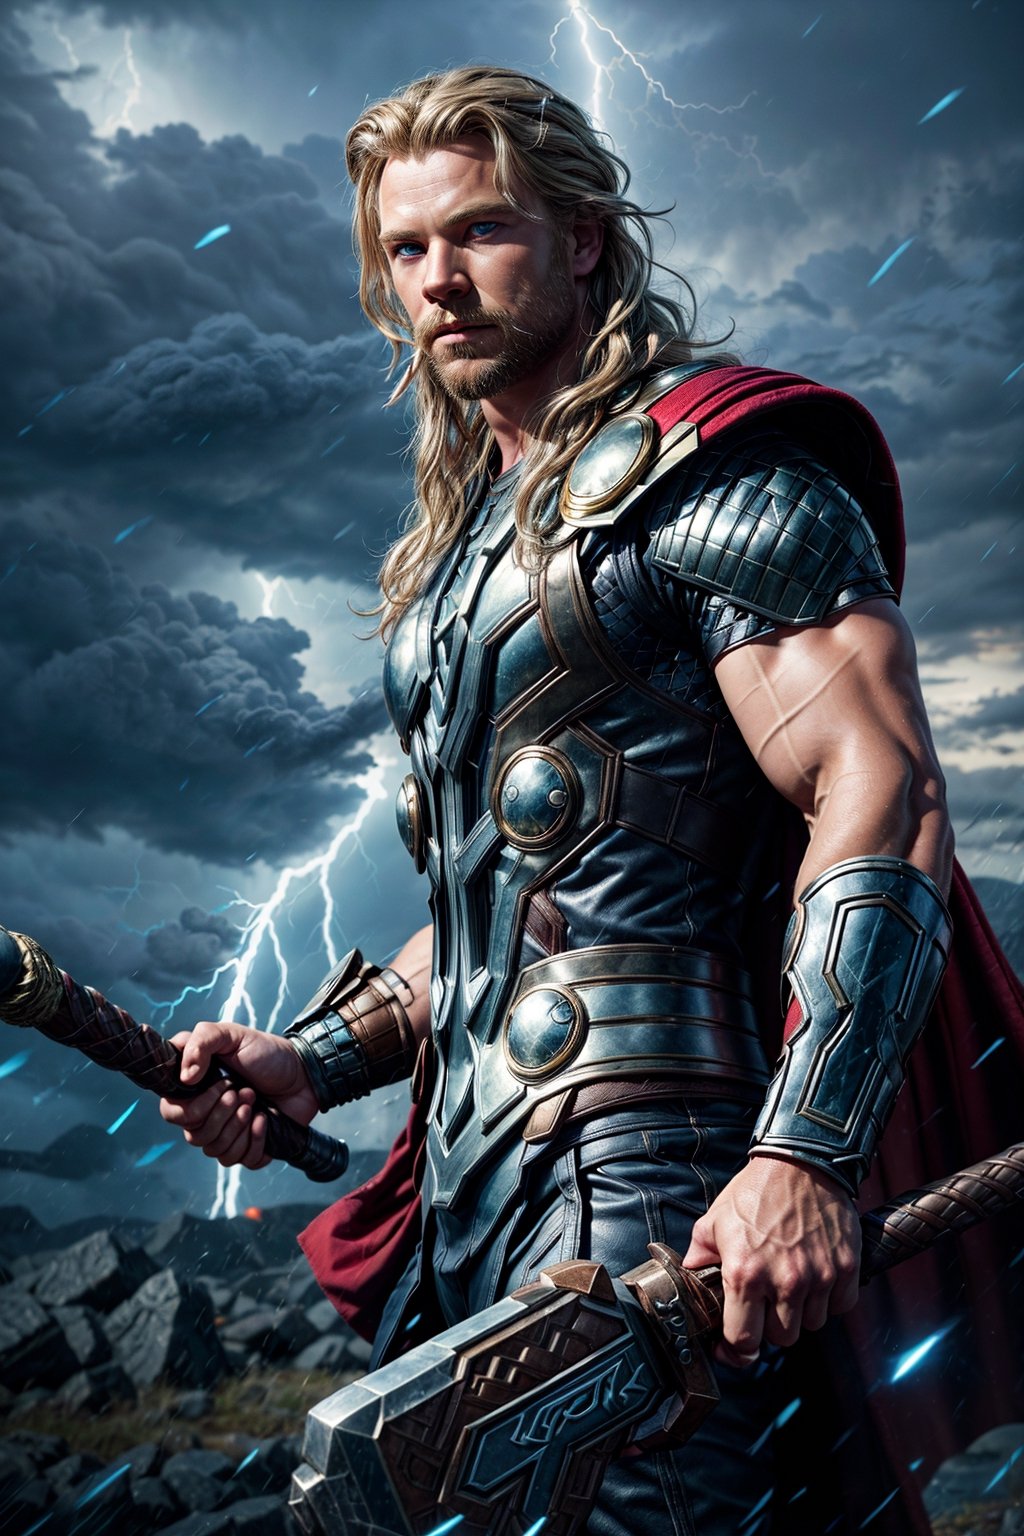 (Thor): "Generate a high-detail image of Thor, the Norse God of Thunder, with striking blue eyes that crackle with electricity. He possesses long, flowing hair that adds to his majestic appearance. His physique is extremely muscular and imposing, radiating an aura of power. His body is surrounded by swirling lightning, and he holds the mythical Mjölnir, his enchanted hammer, ready to unleash its thunderous might.", sexypirate (perfect face), (perfect eyes and lips), (perfect mascular body Armour), lightning background, photographic cinematic super super high detailed super realistic image, 4k Ultra HDR high quality image, masterpiece, , perfecteyes, ,perfecteyes,lightning farron